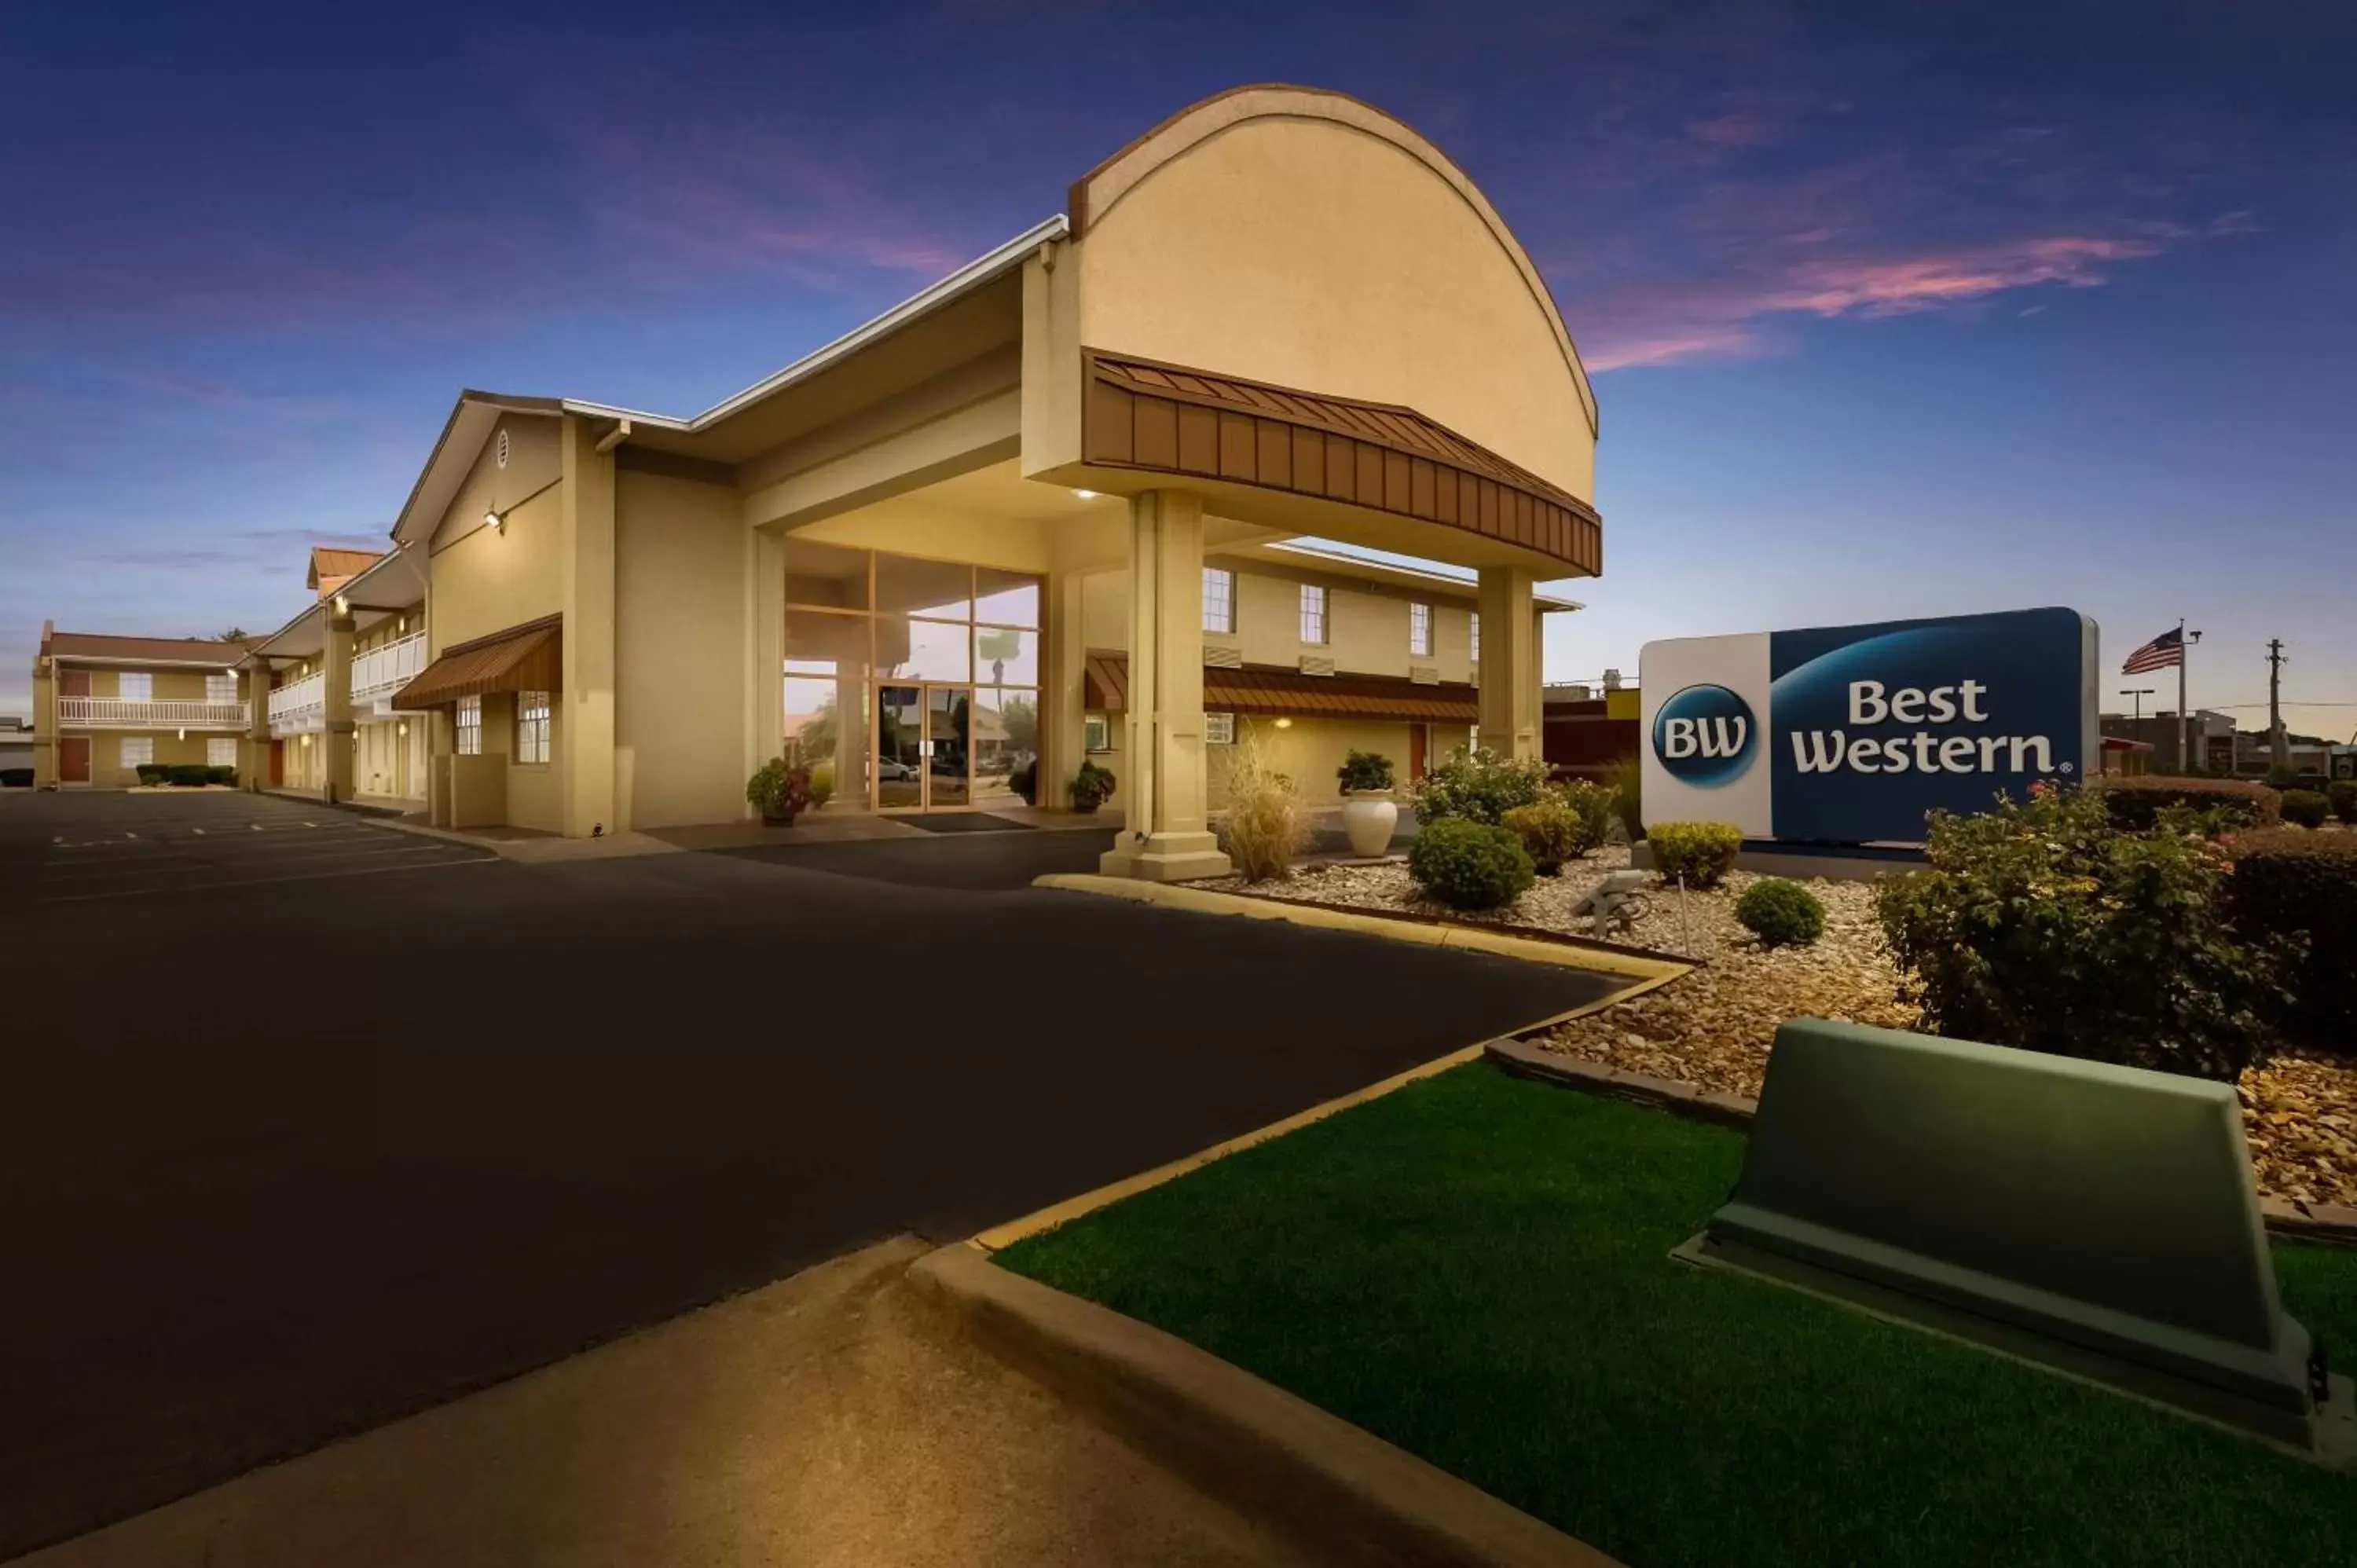 Property Building in Best Western Conway